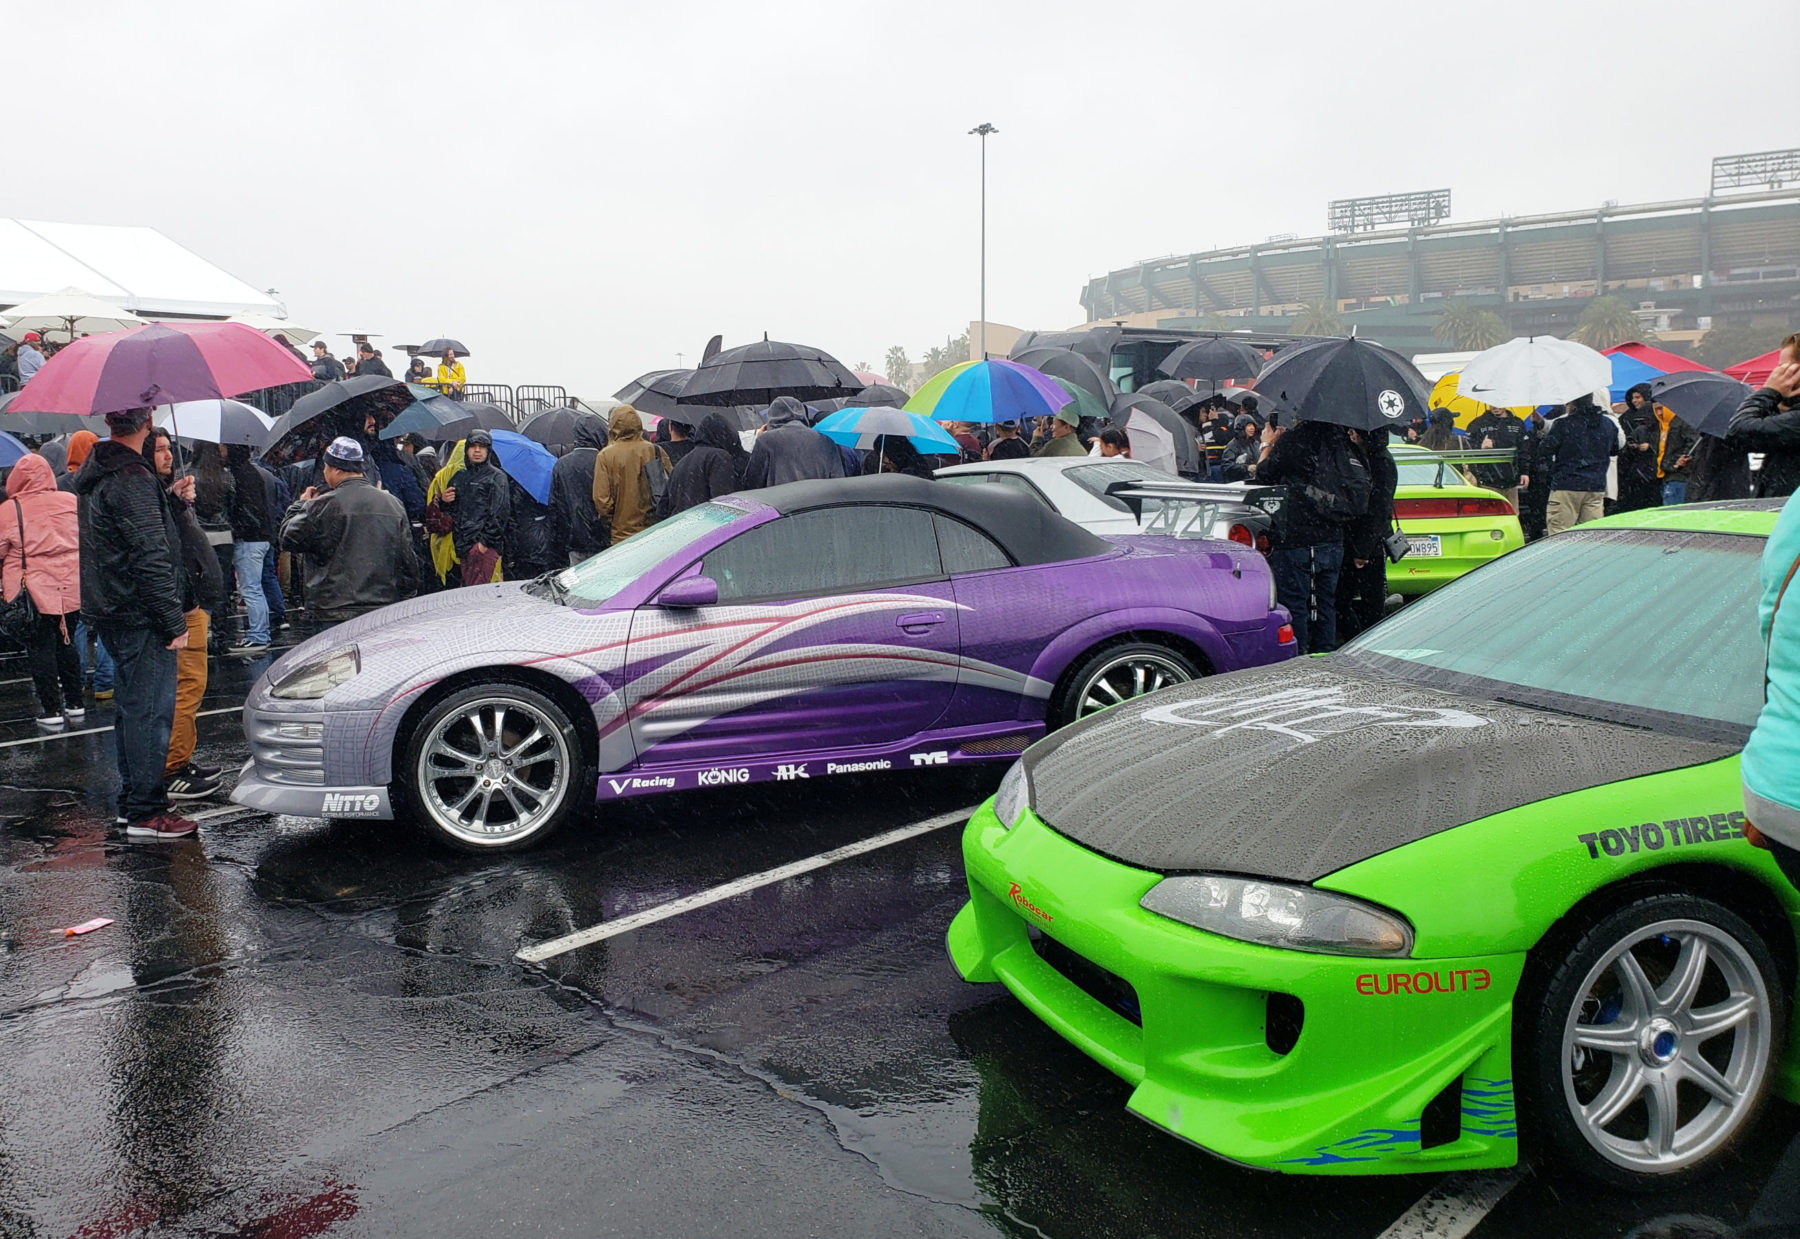 Fuel Fest Is Where Cars Meet for a Good Cause el Don News